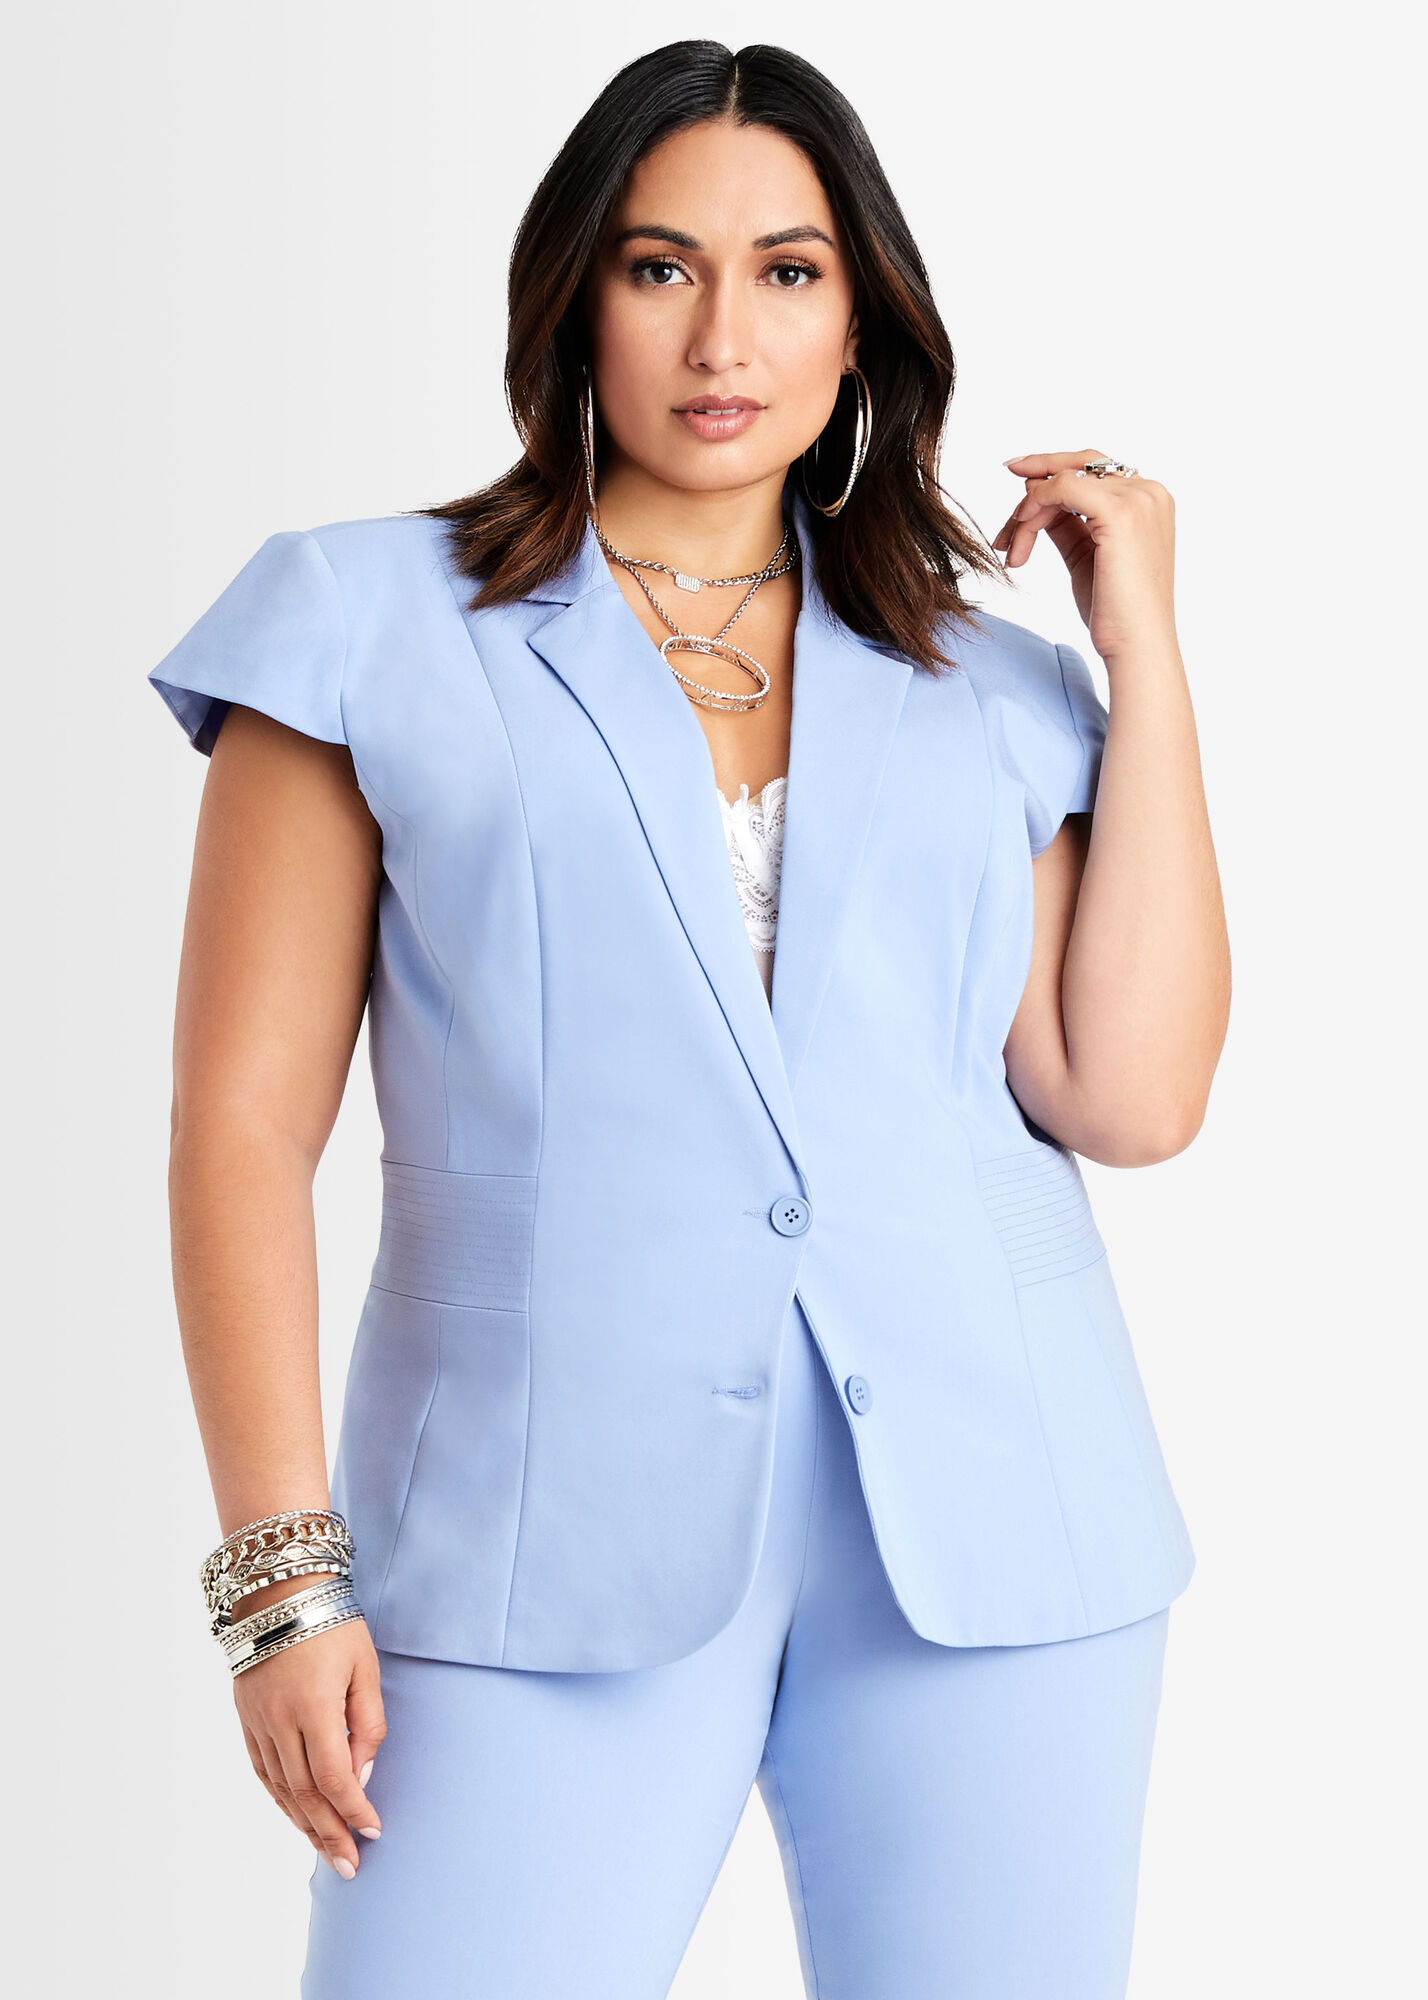 Trechter webspin straal kleuring Plus Size Lace Up Belted Cap Sleeve Blazer Ankle Pant 2pc Suit